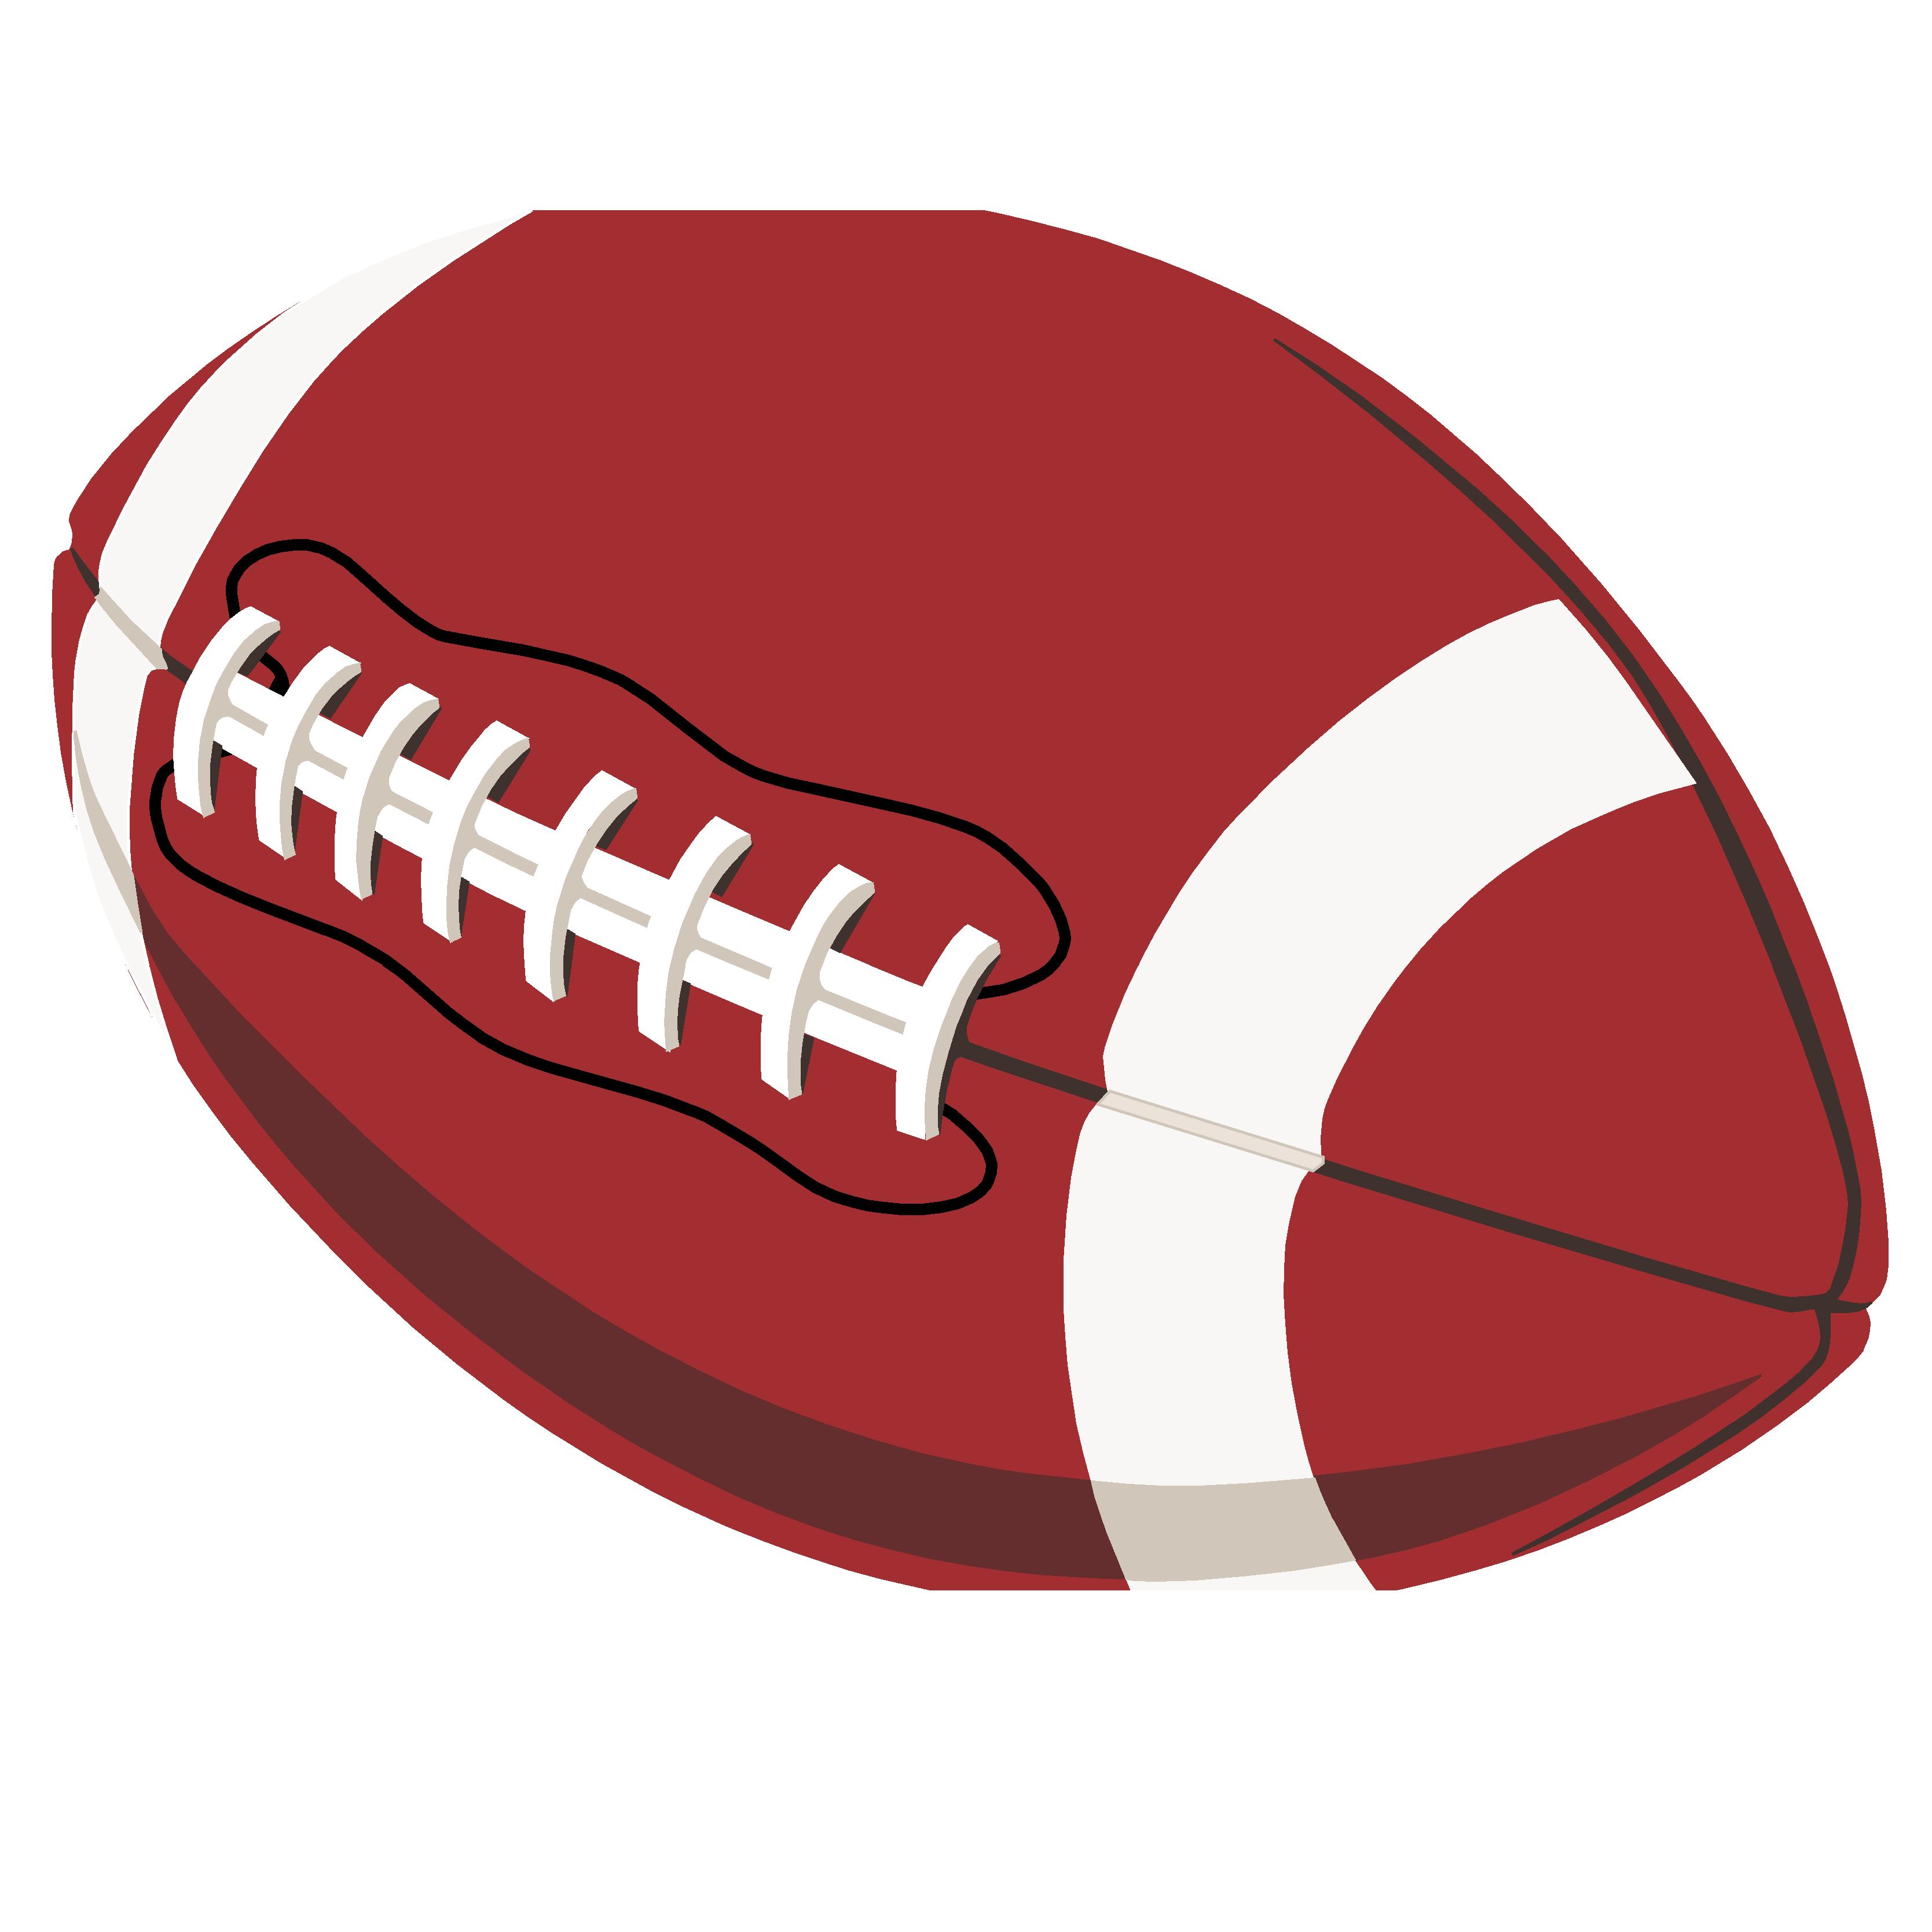 Free Football Graphic, Download Free Clip Art, Free Clip Art on Clipart